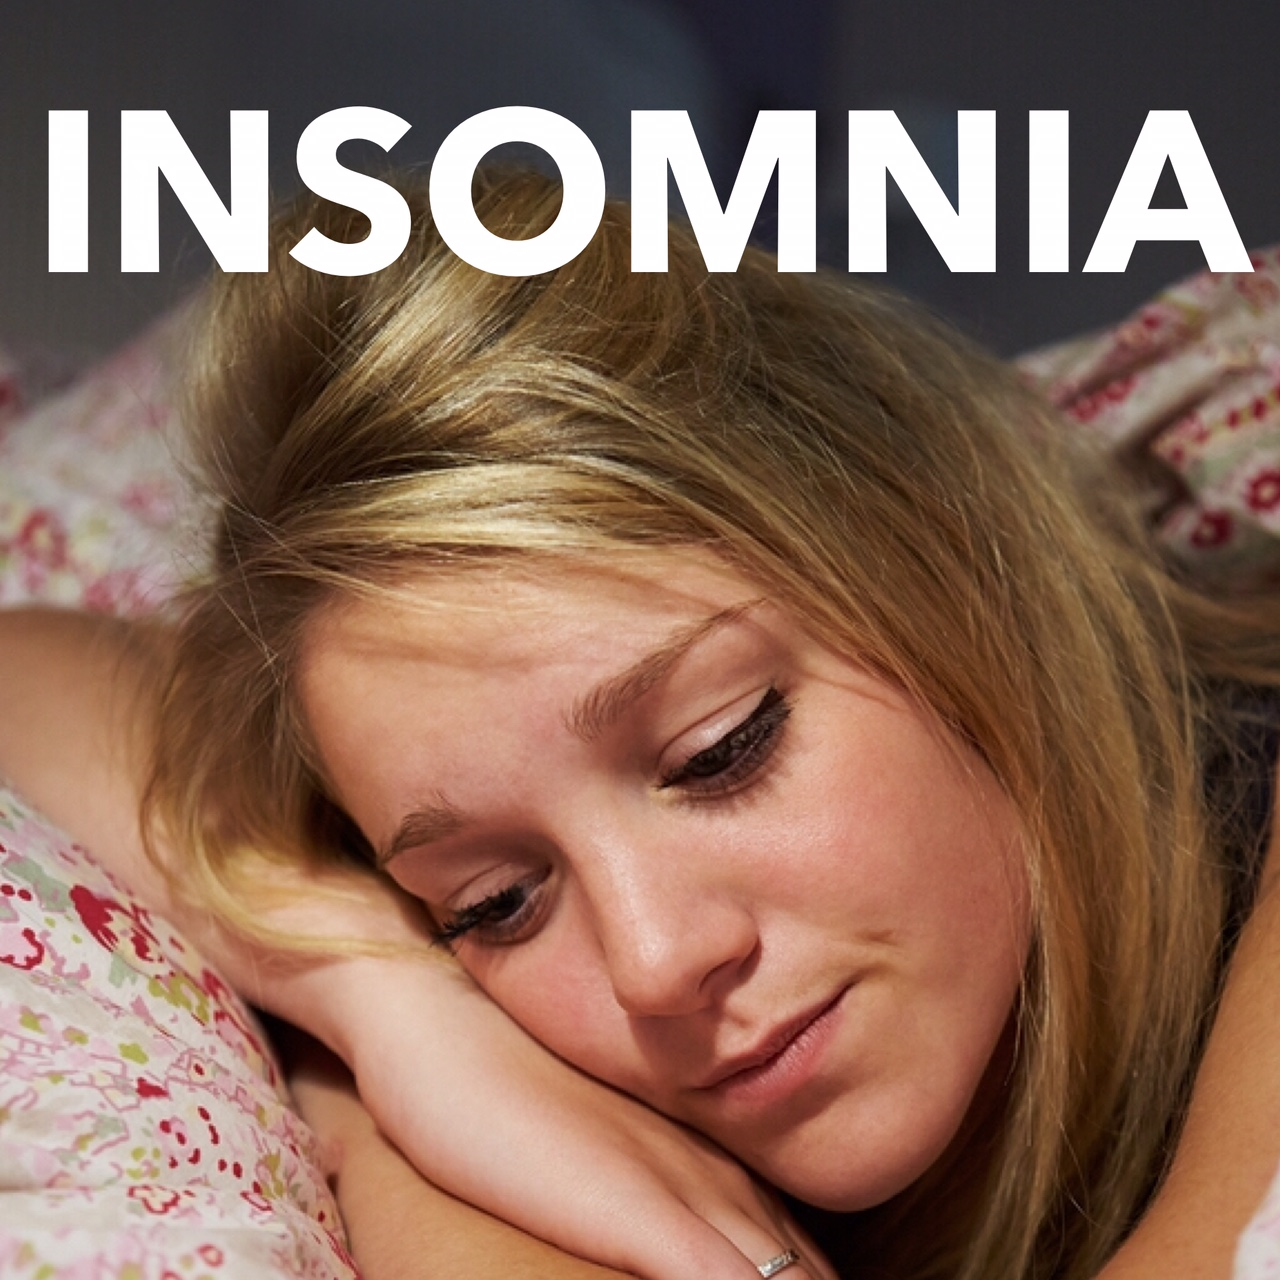 Insomnia: What is it and how is it treated?